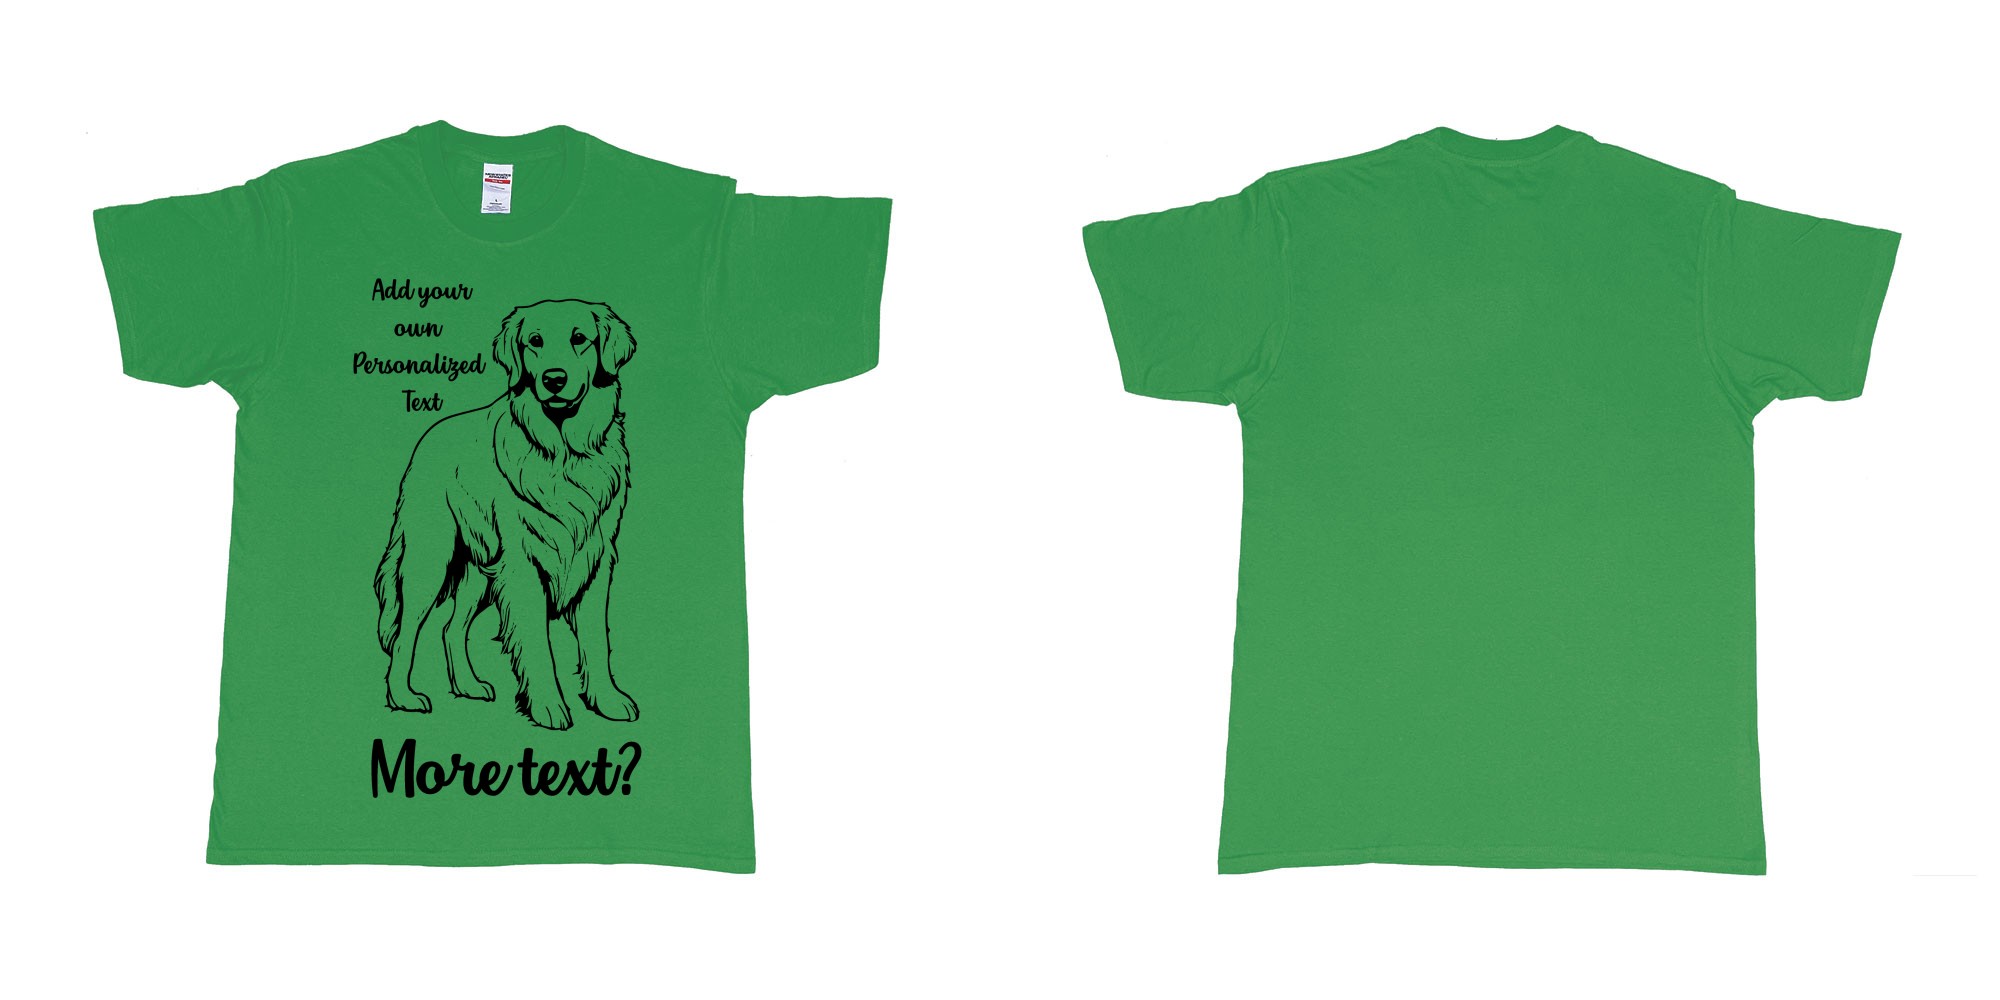 Custom tshirt design golden retriever dog breed personalized text in fabric color irish-green choice your own text made in Bali by The Pirate Way